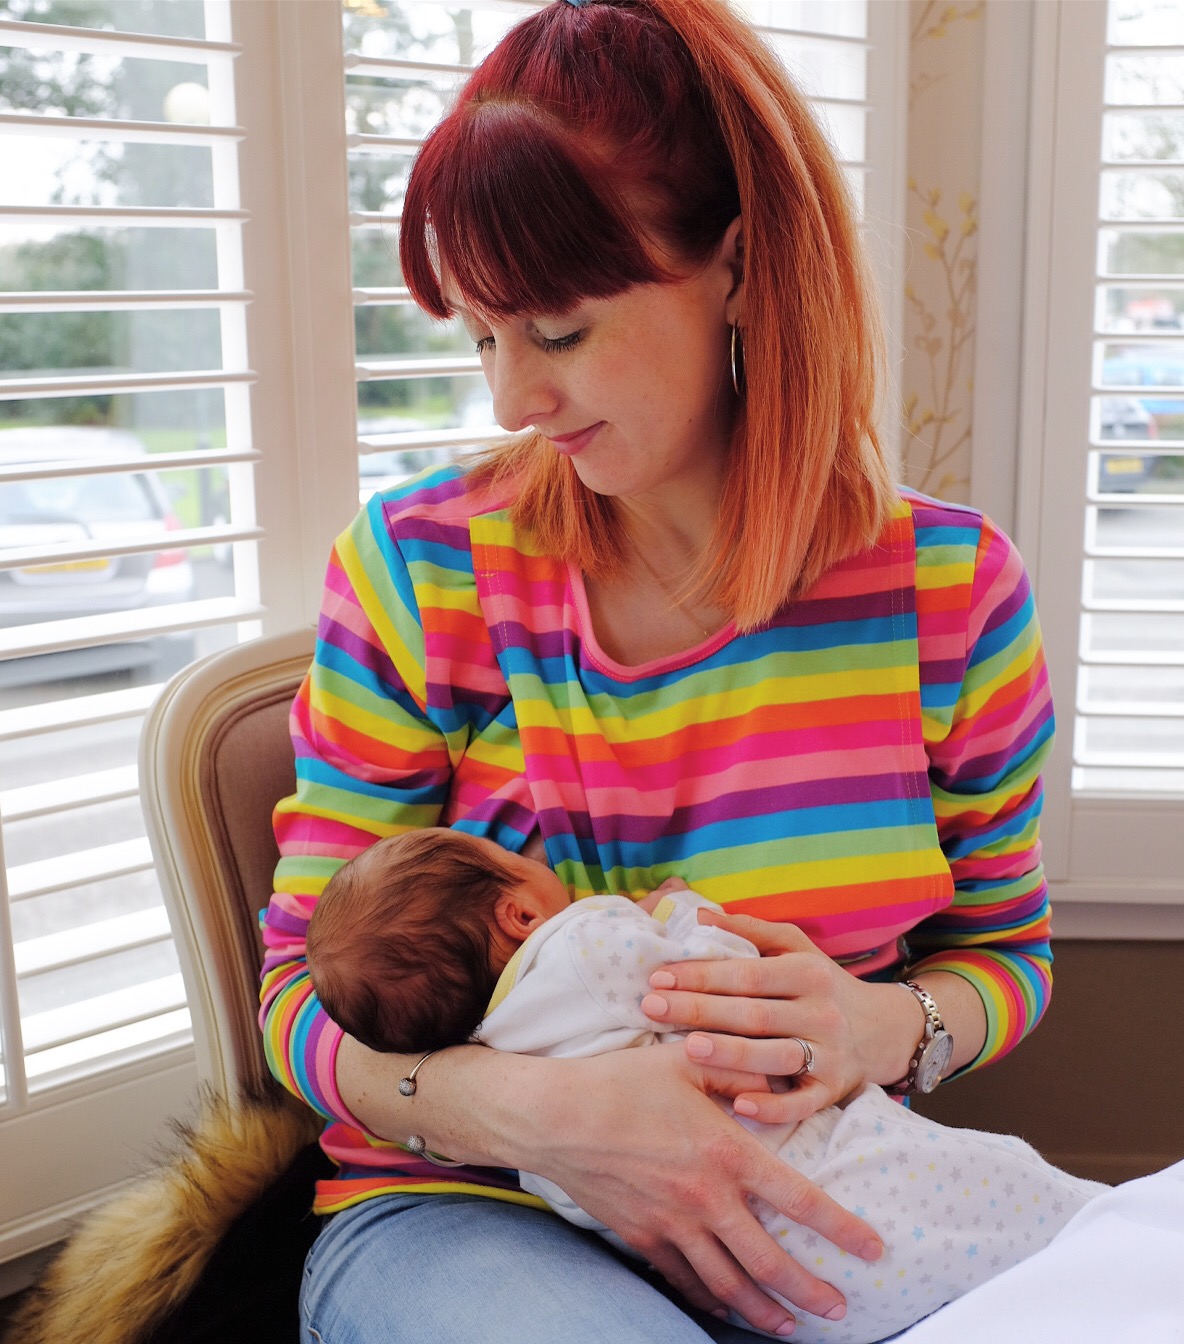 10 Things I’d Forgotten About Breastfeeding a Newborn